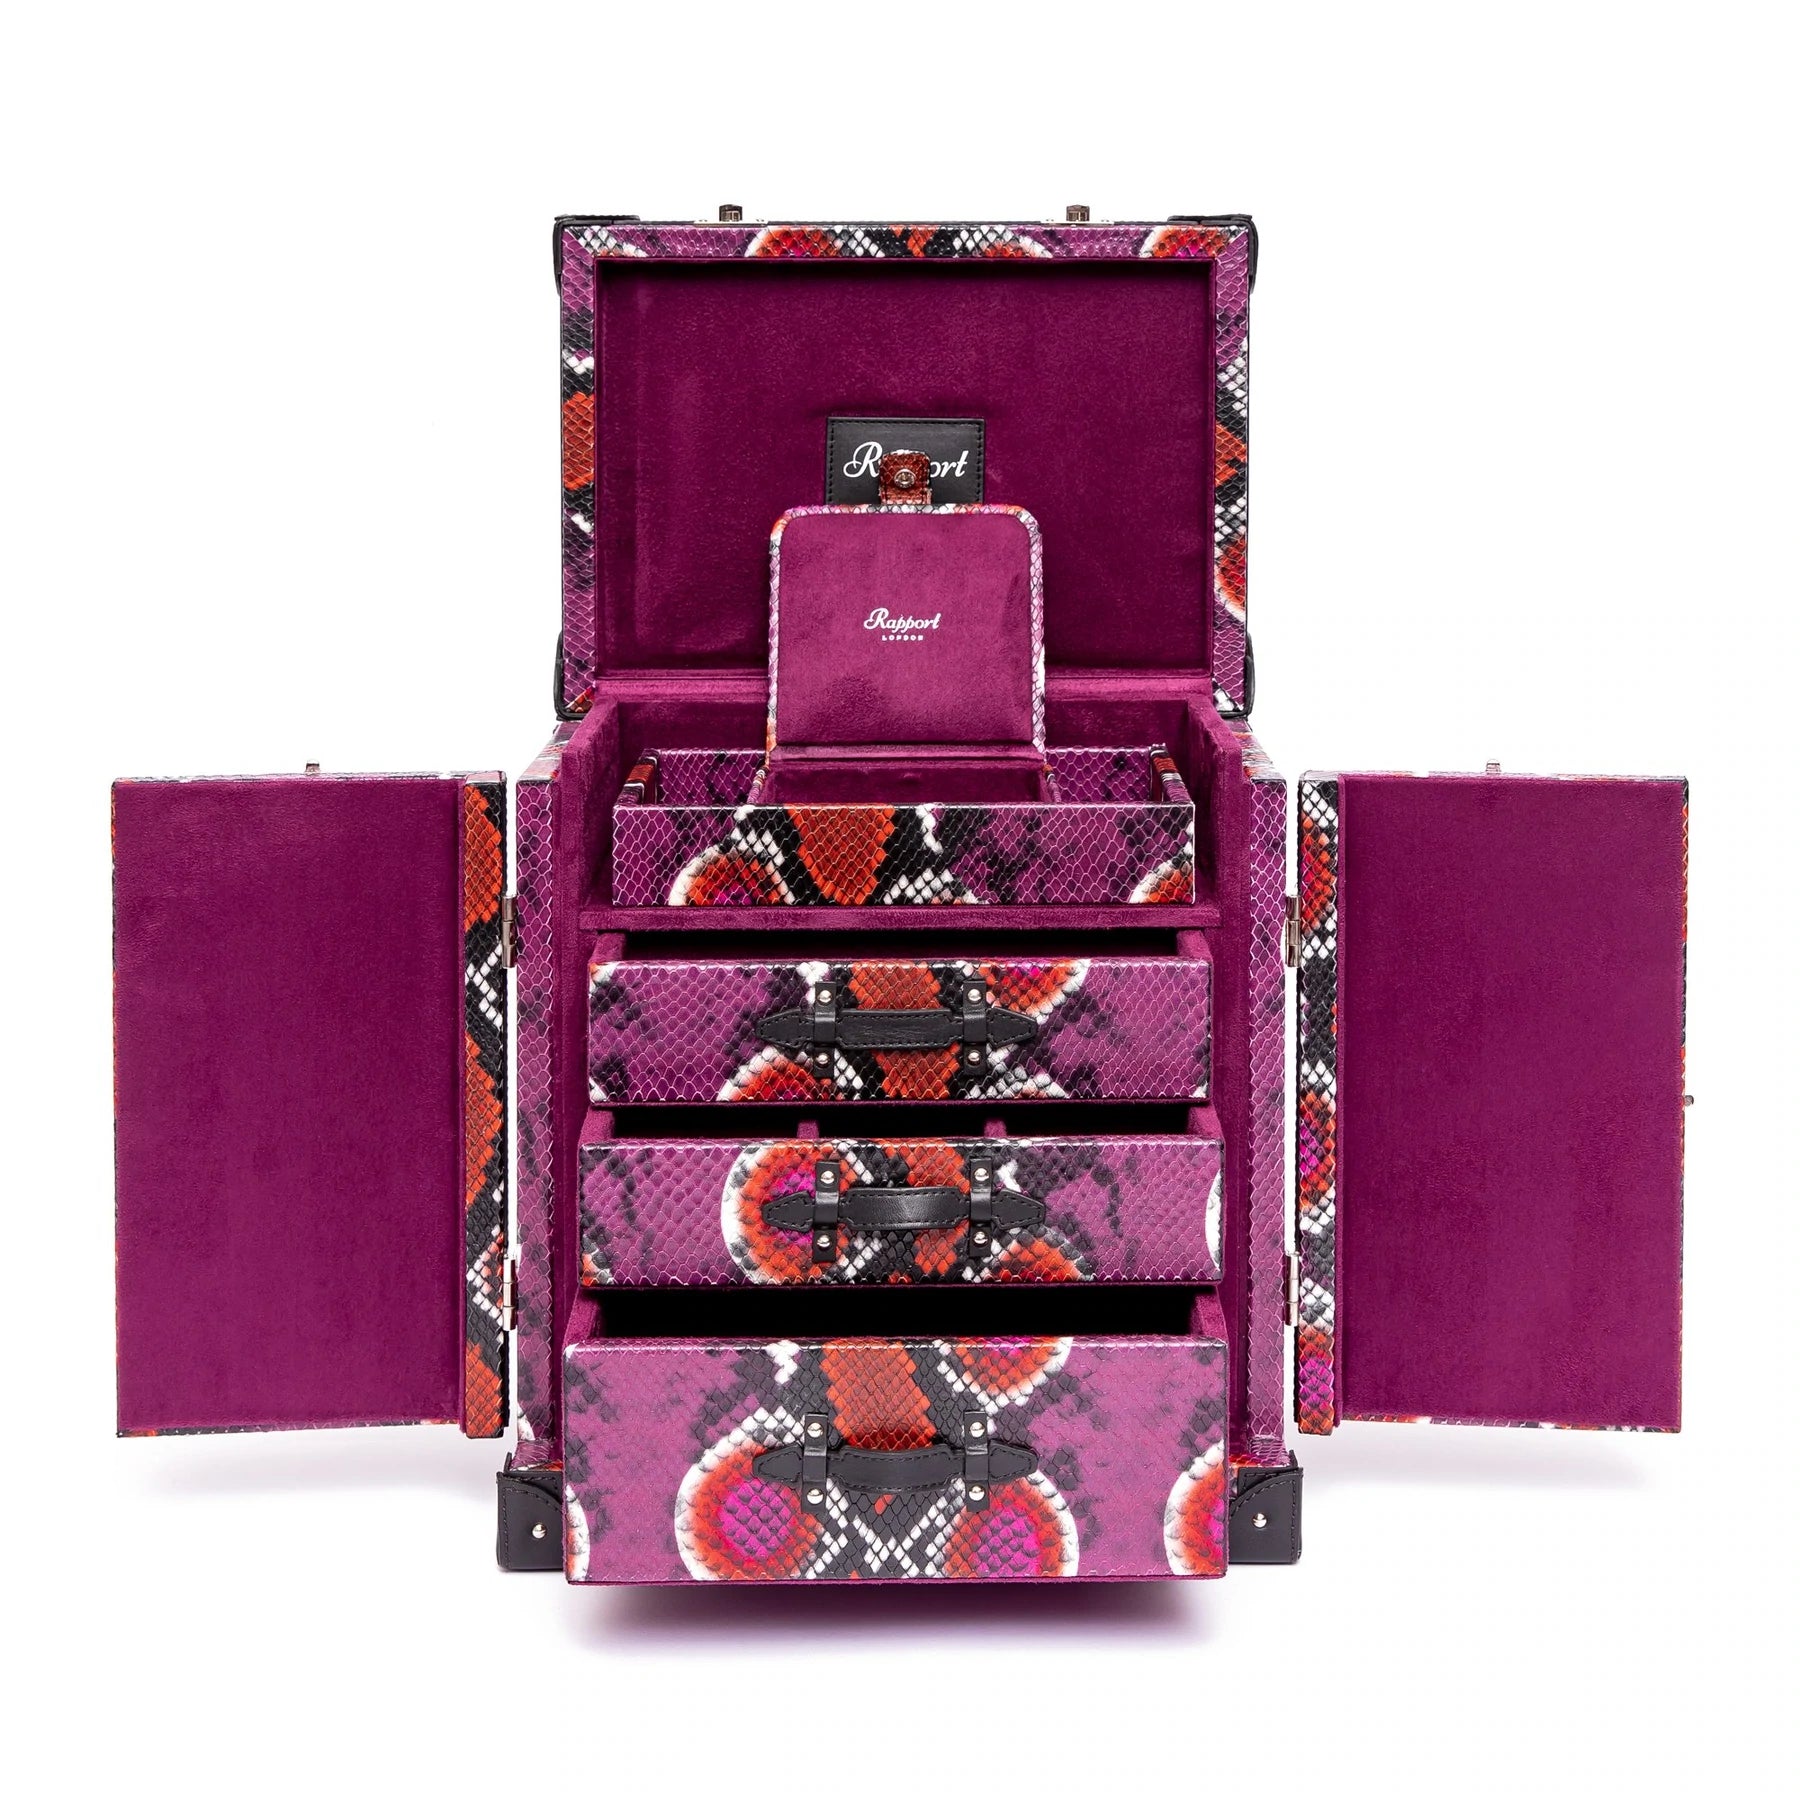 Rapport - Amour Deluxe Jewelry Trunk in Pink Leather | J156